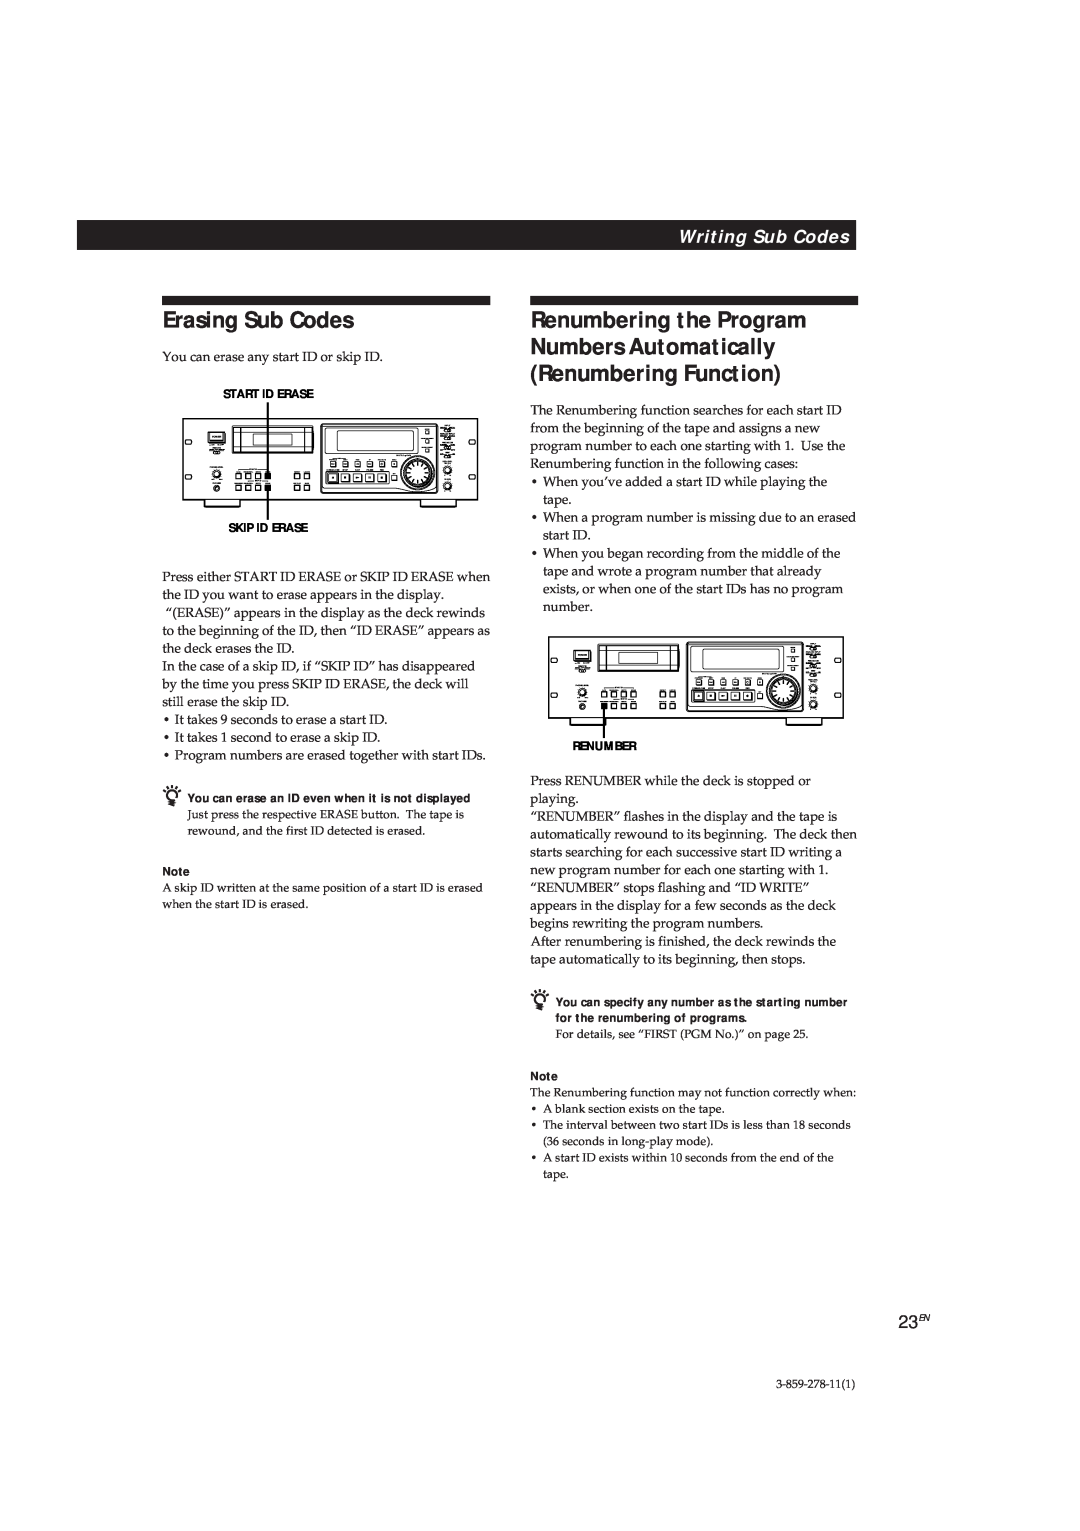 Sony PCM-R700 Erasing Sub Codes, Renumbering the Program Numbers Automatically, Renumbering Function, Writing Sub Codes 